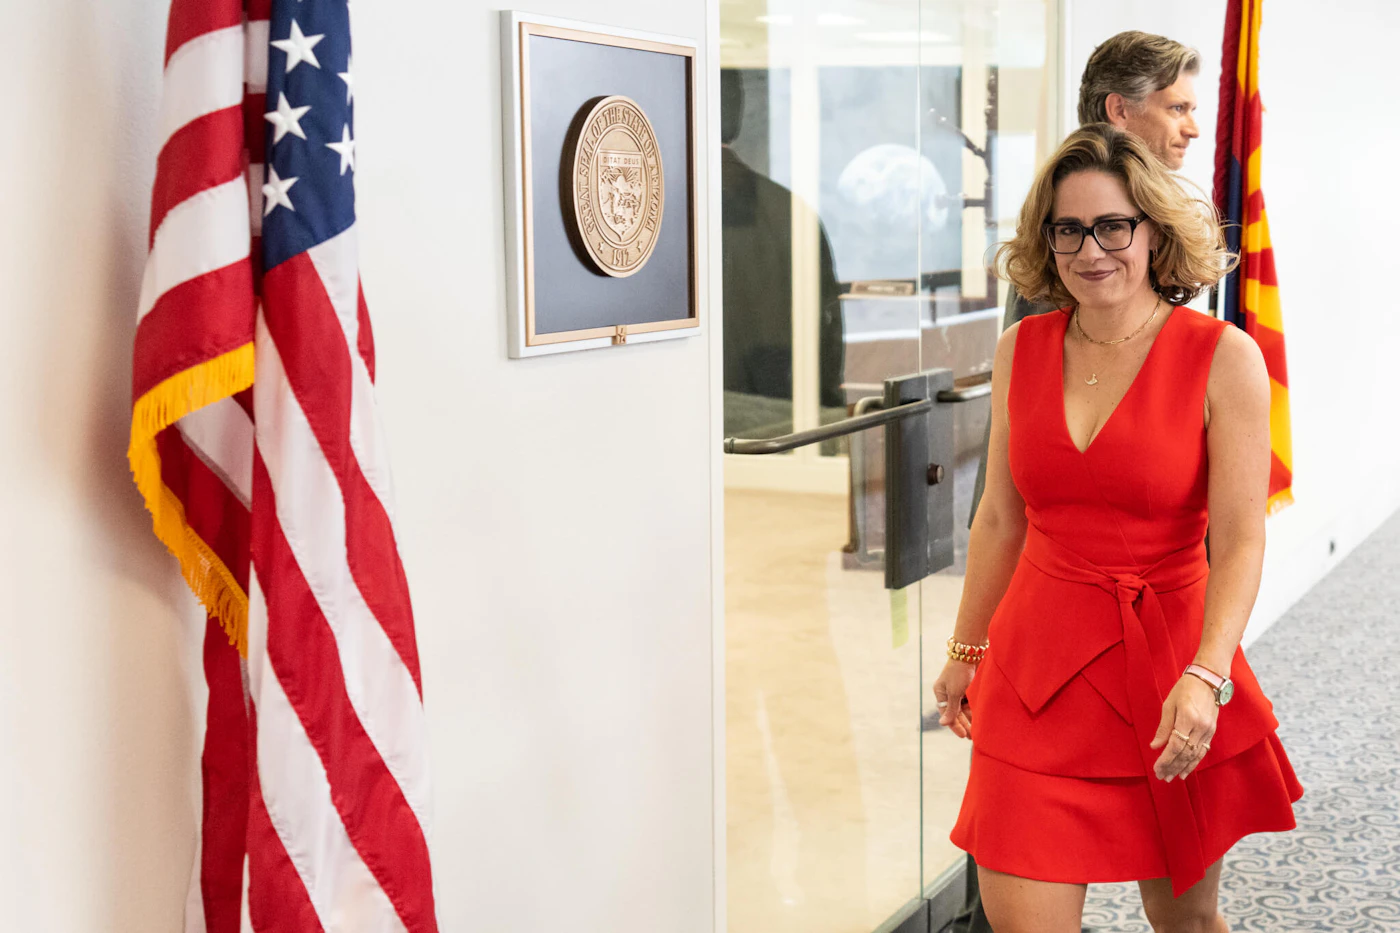 WASHINGTON - APRIL 19: Sen. Kyrsten Sinema, I-Ariz., leaves Sen. Mark Kelly's office after meeting with Sen. Kelly and Rep. Ruben Gallego in the Hart Senate Office Building  on Wednesday, April 19, 2023. (Bill Clark/CQ-Roll Call, Inc via Getty Images)